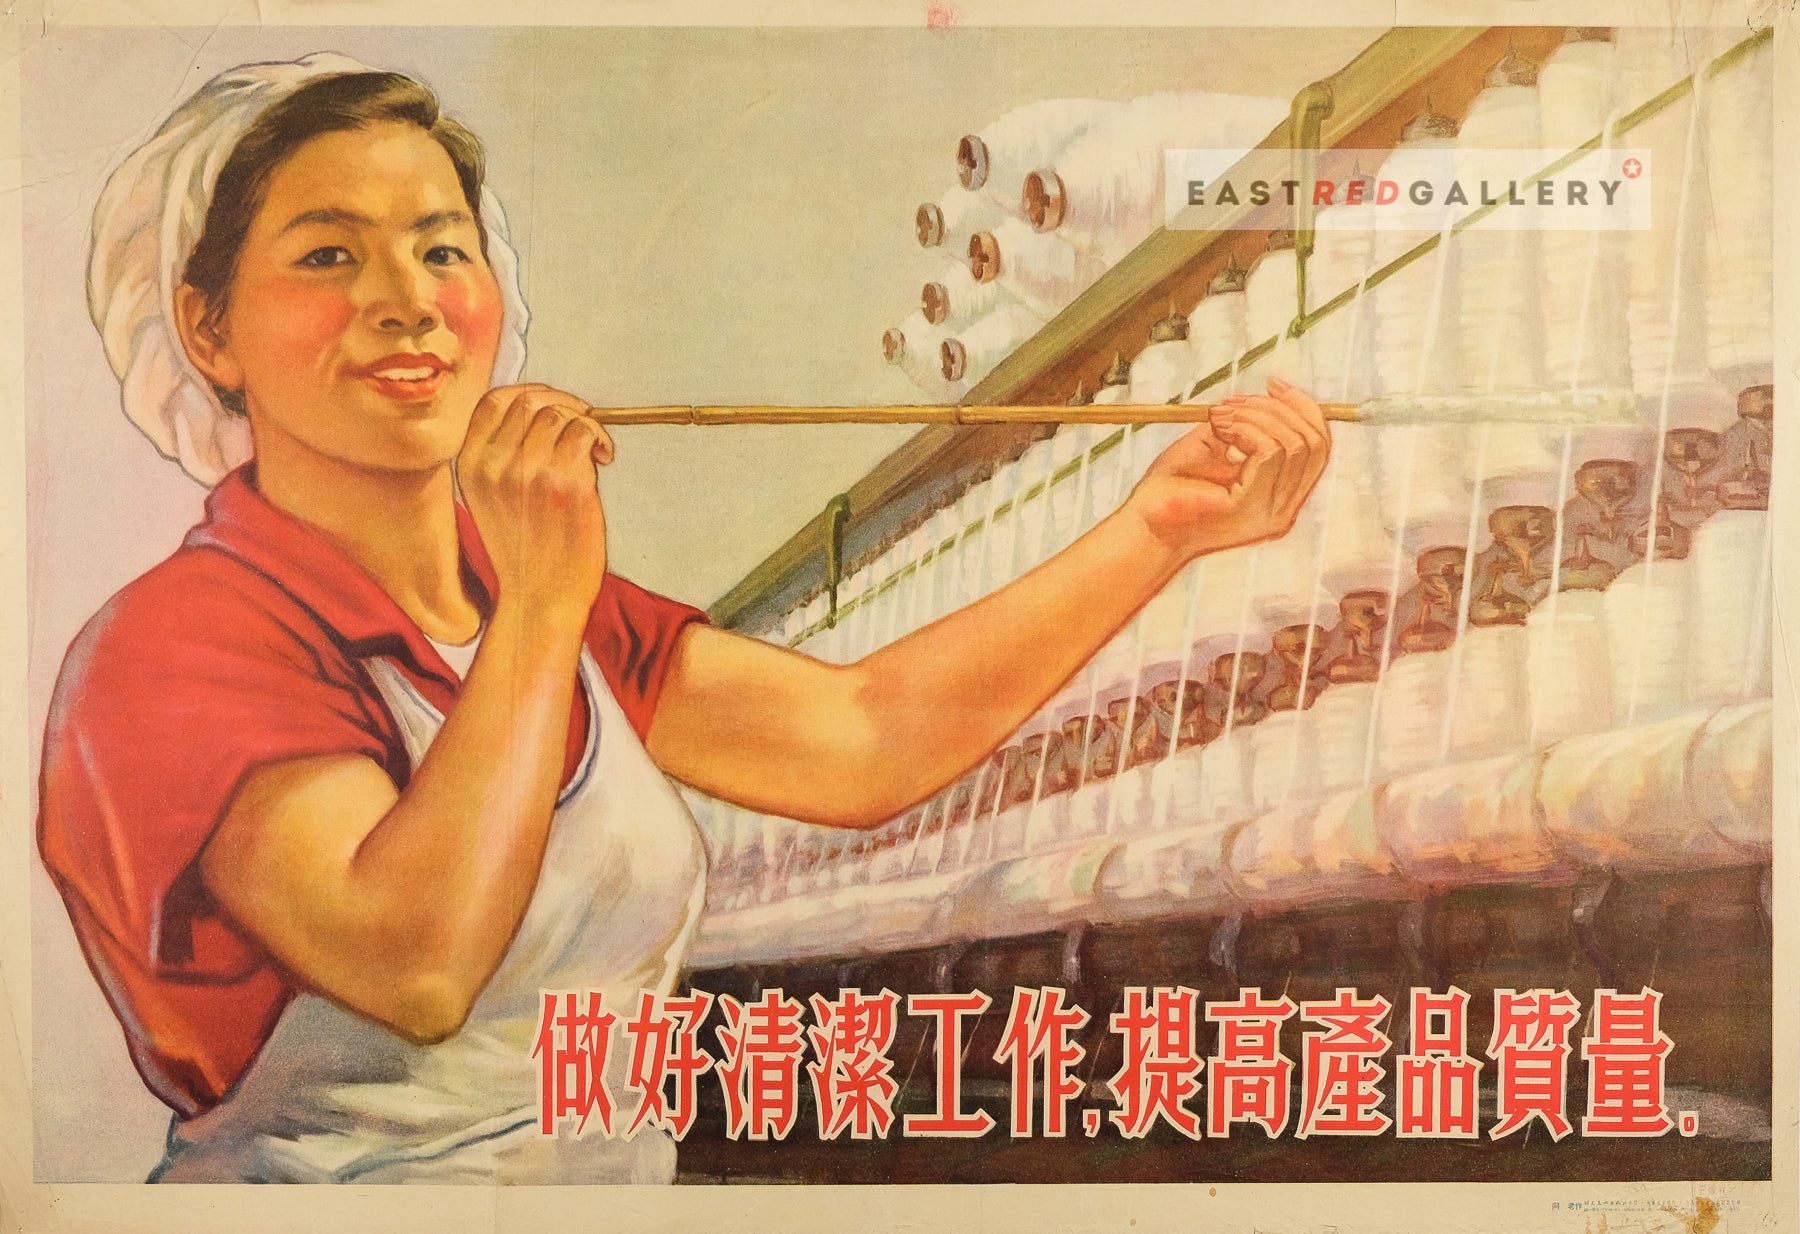 image of 1956 Chinese propaganda poster Do a good job of cleaning, improve product quality